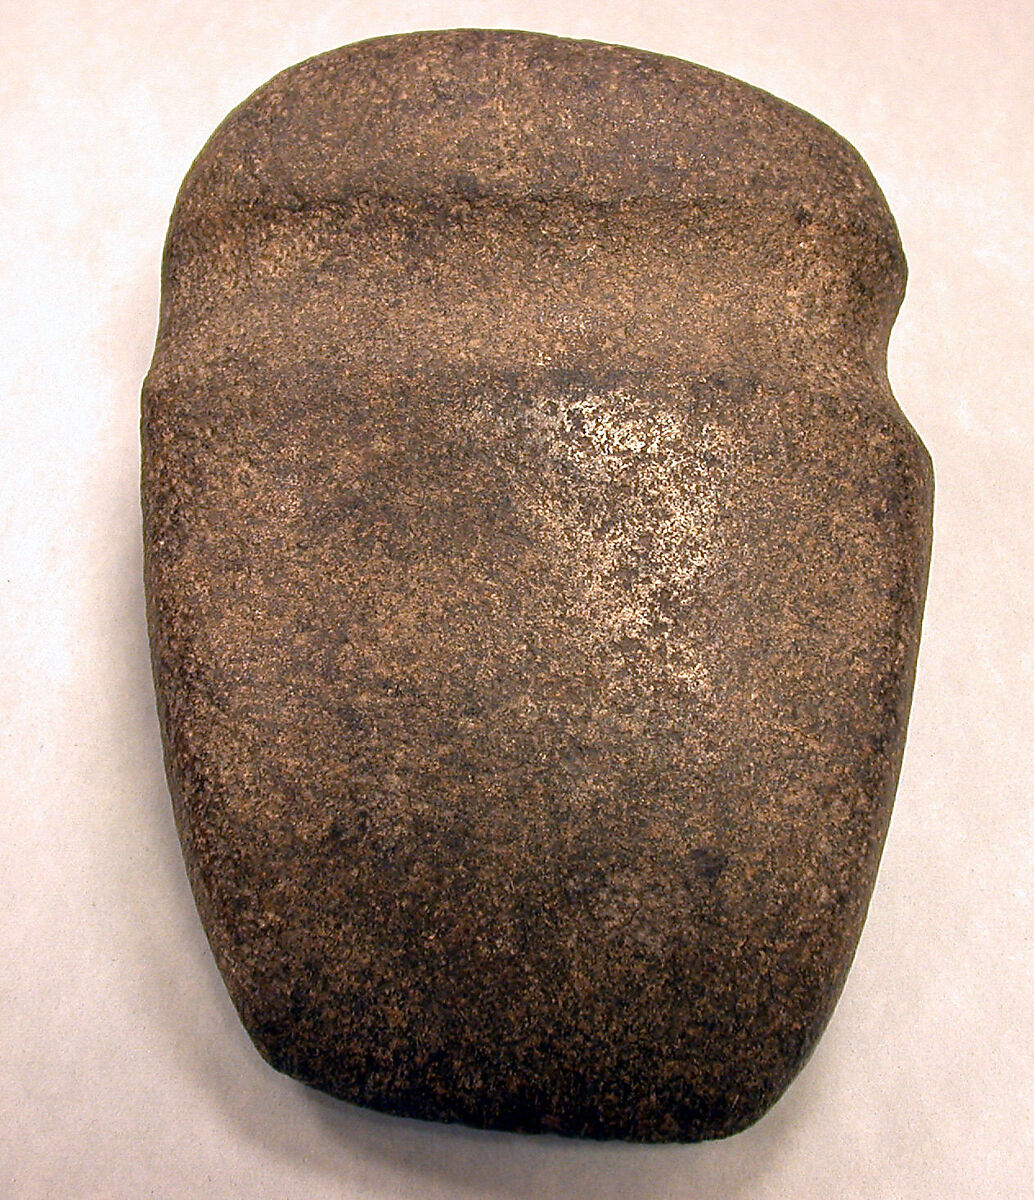 Grooved axe, Stone, Archaic 